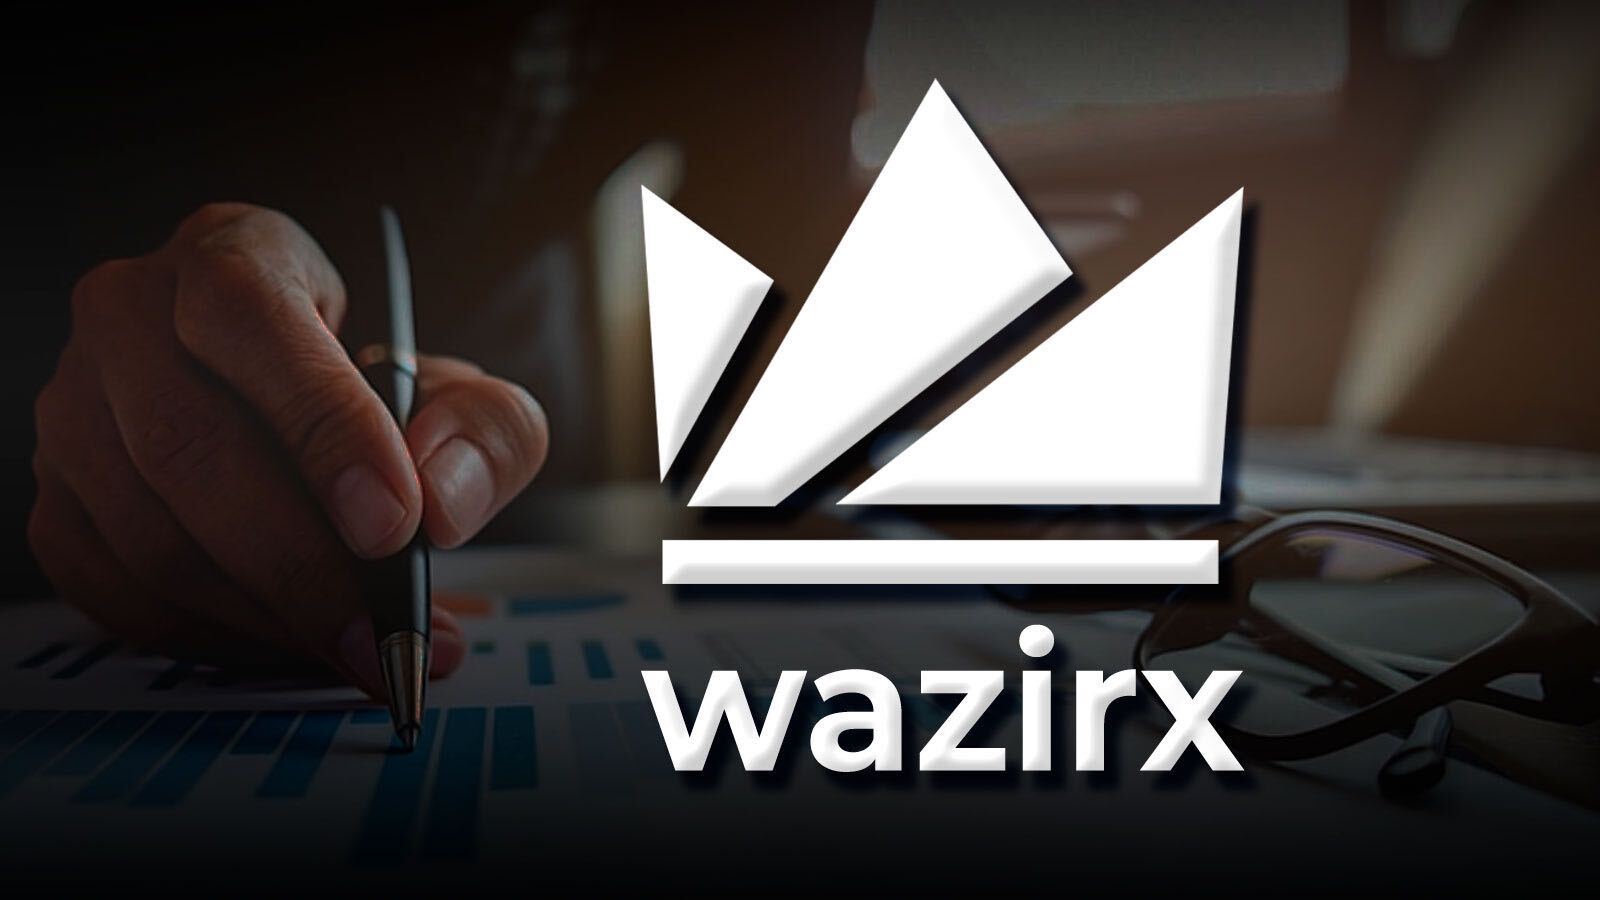 WazirX Comes Under Investigation As $350 Million Laundered Through Largest Indian Exchange